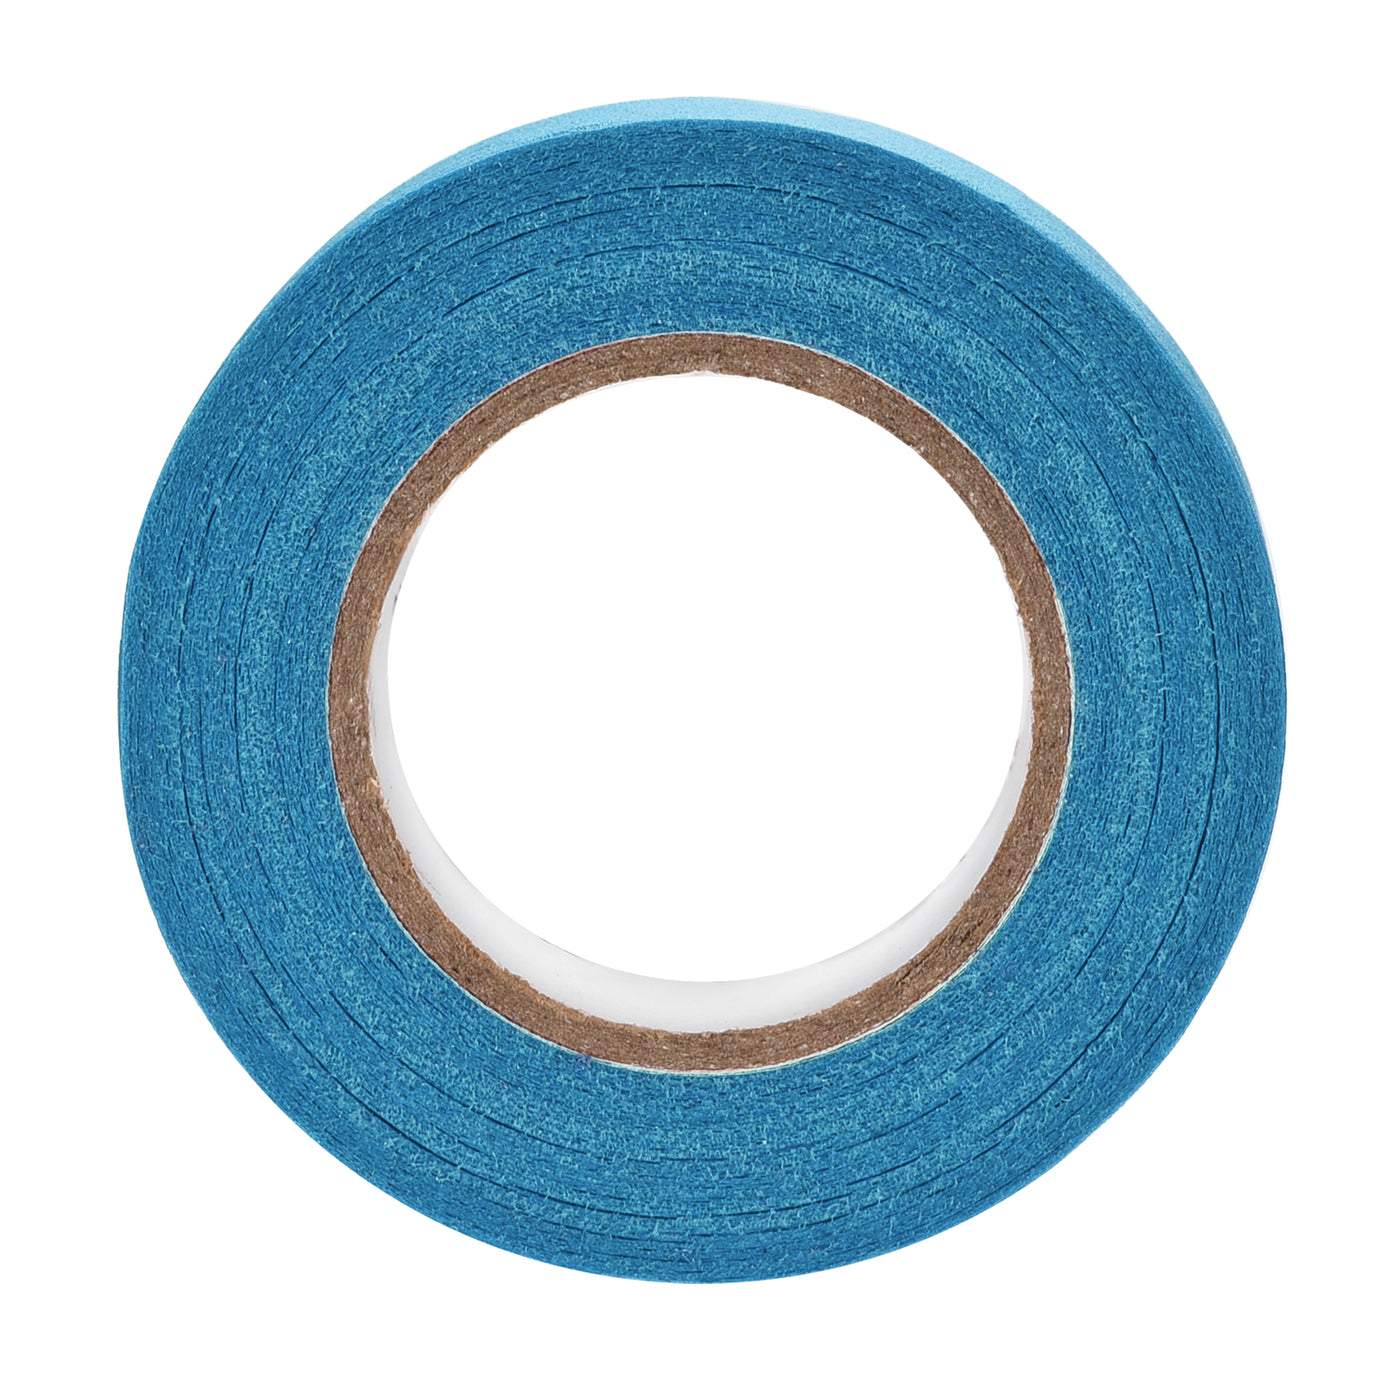 uxcell Uxcell 3Pcs 30mm 1.2 inch Wide 20m 21 Yards Masking Tape Painters Tape Rolls Light Blue